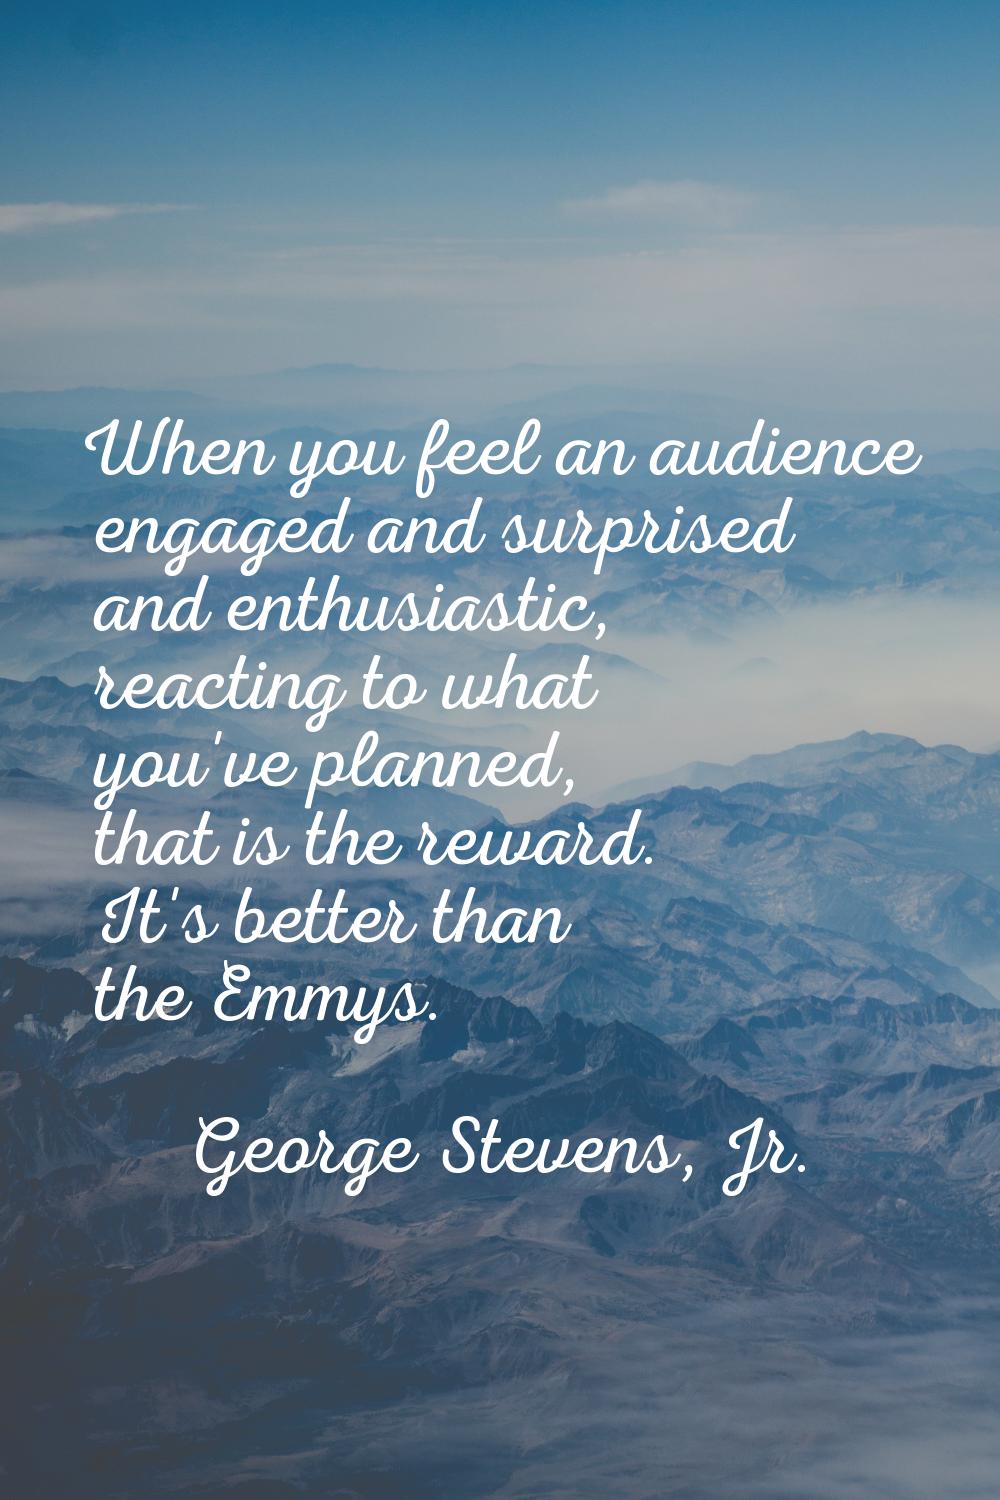 When you feel an audience engaged and surprised and enthusiastic, reacting to what you've planned, 